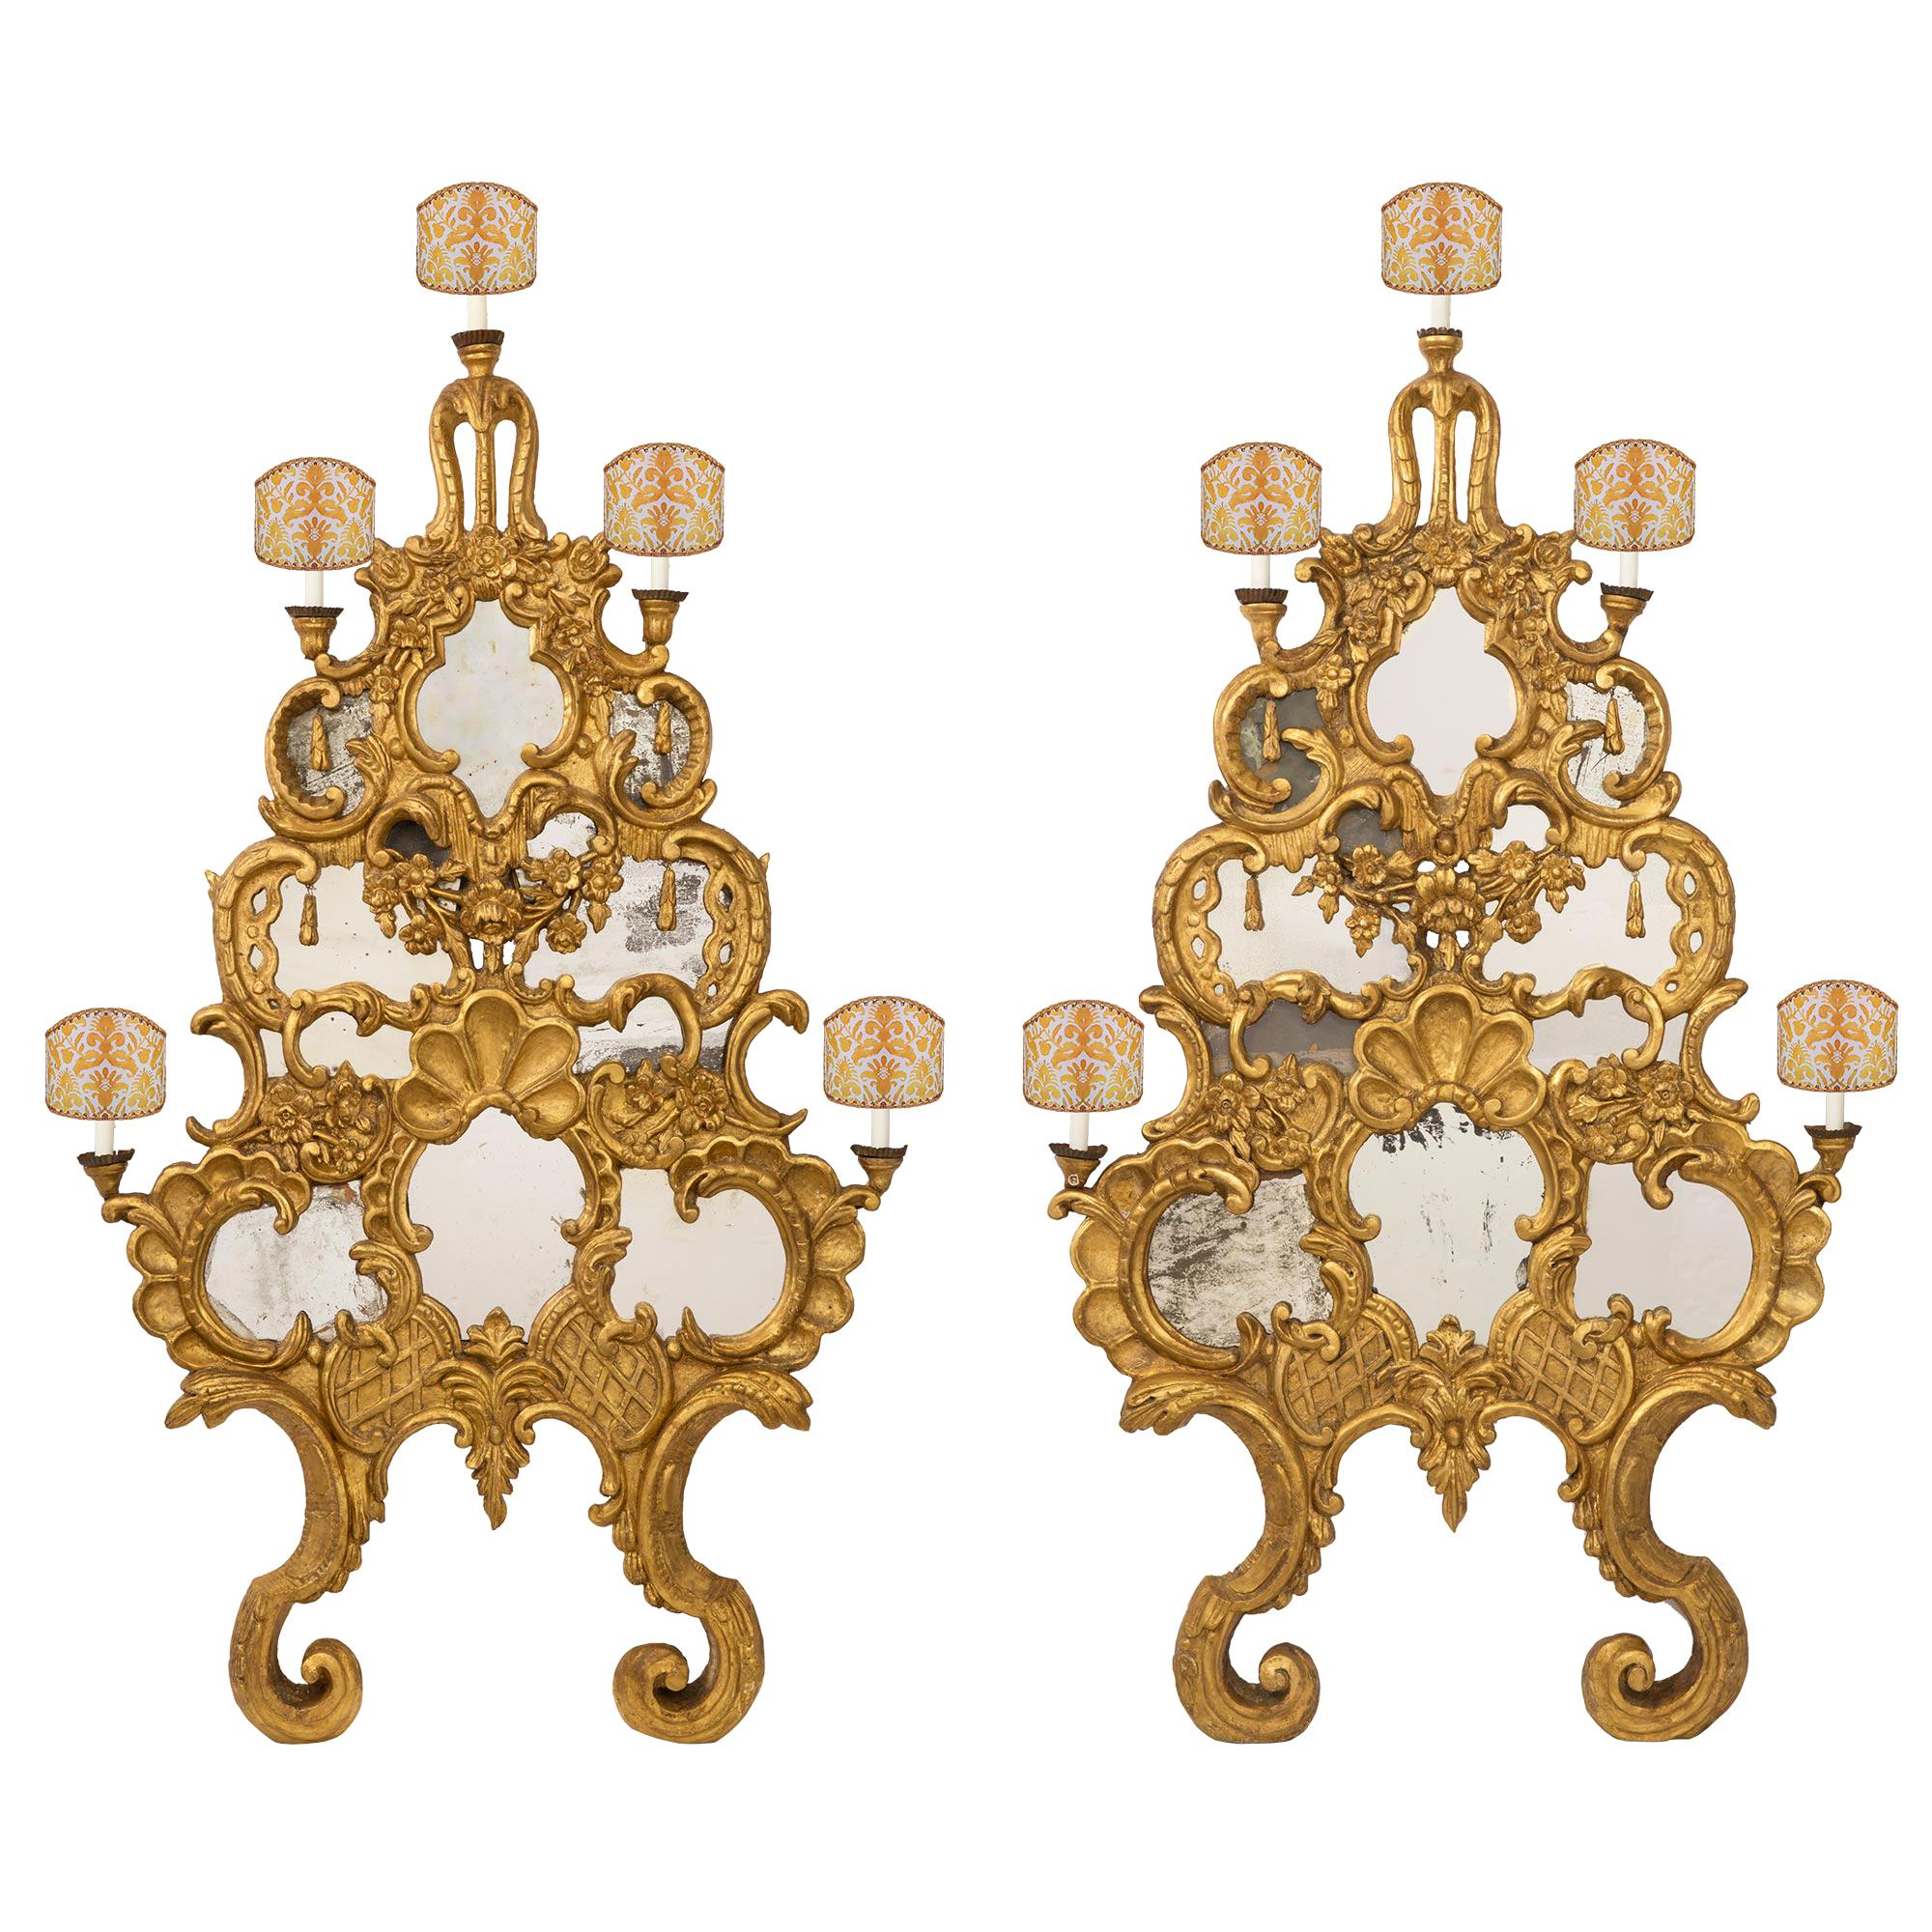 Pair of Italian Mid-18th Century, Mirrored Giltwood Baroque Sconces For Sale